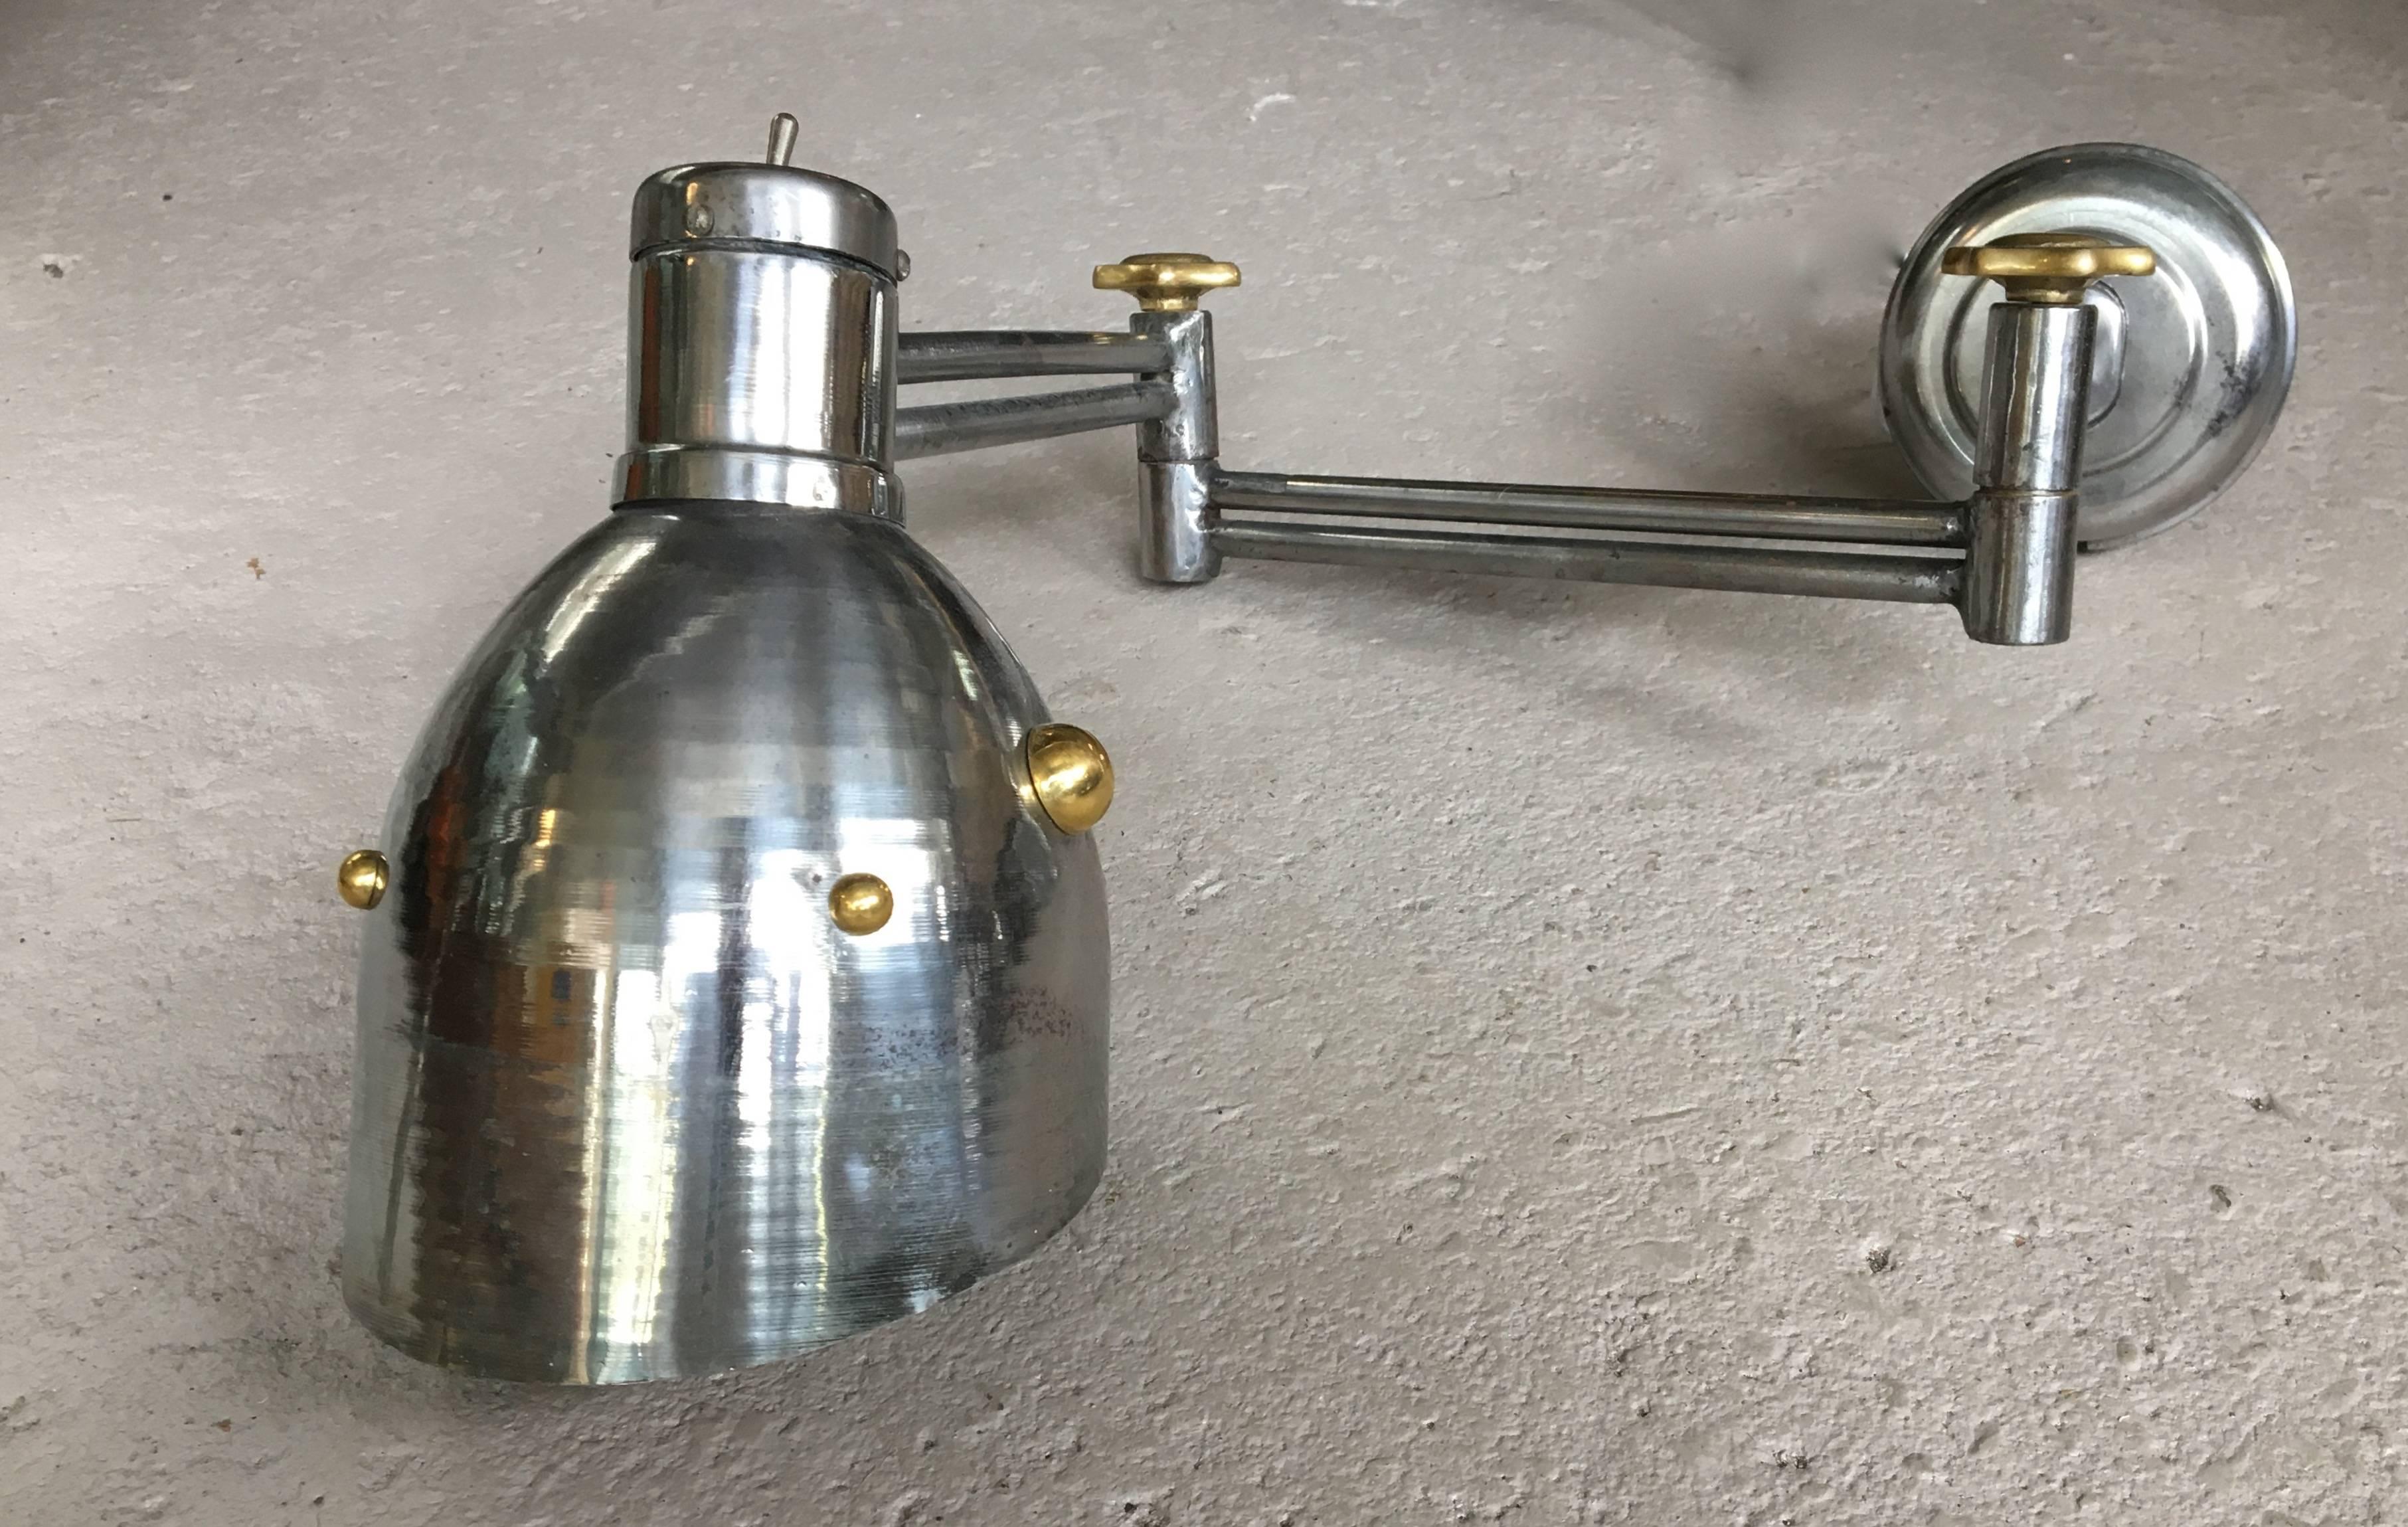 Pair of substantial articulated wall lights, polished steel with brass detailing; all new U.S. wiring. Priced per piece.
Avantgarden Ltd. cultivates unexpected and exceptional lighting, furniture and design. To view items in person please visit our